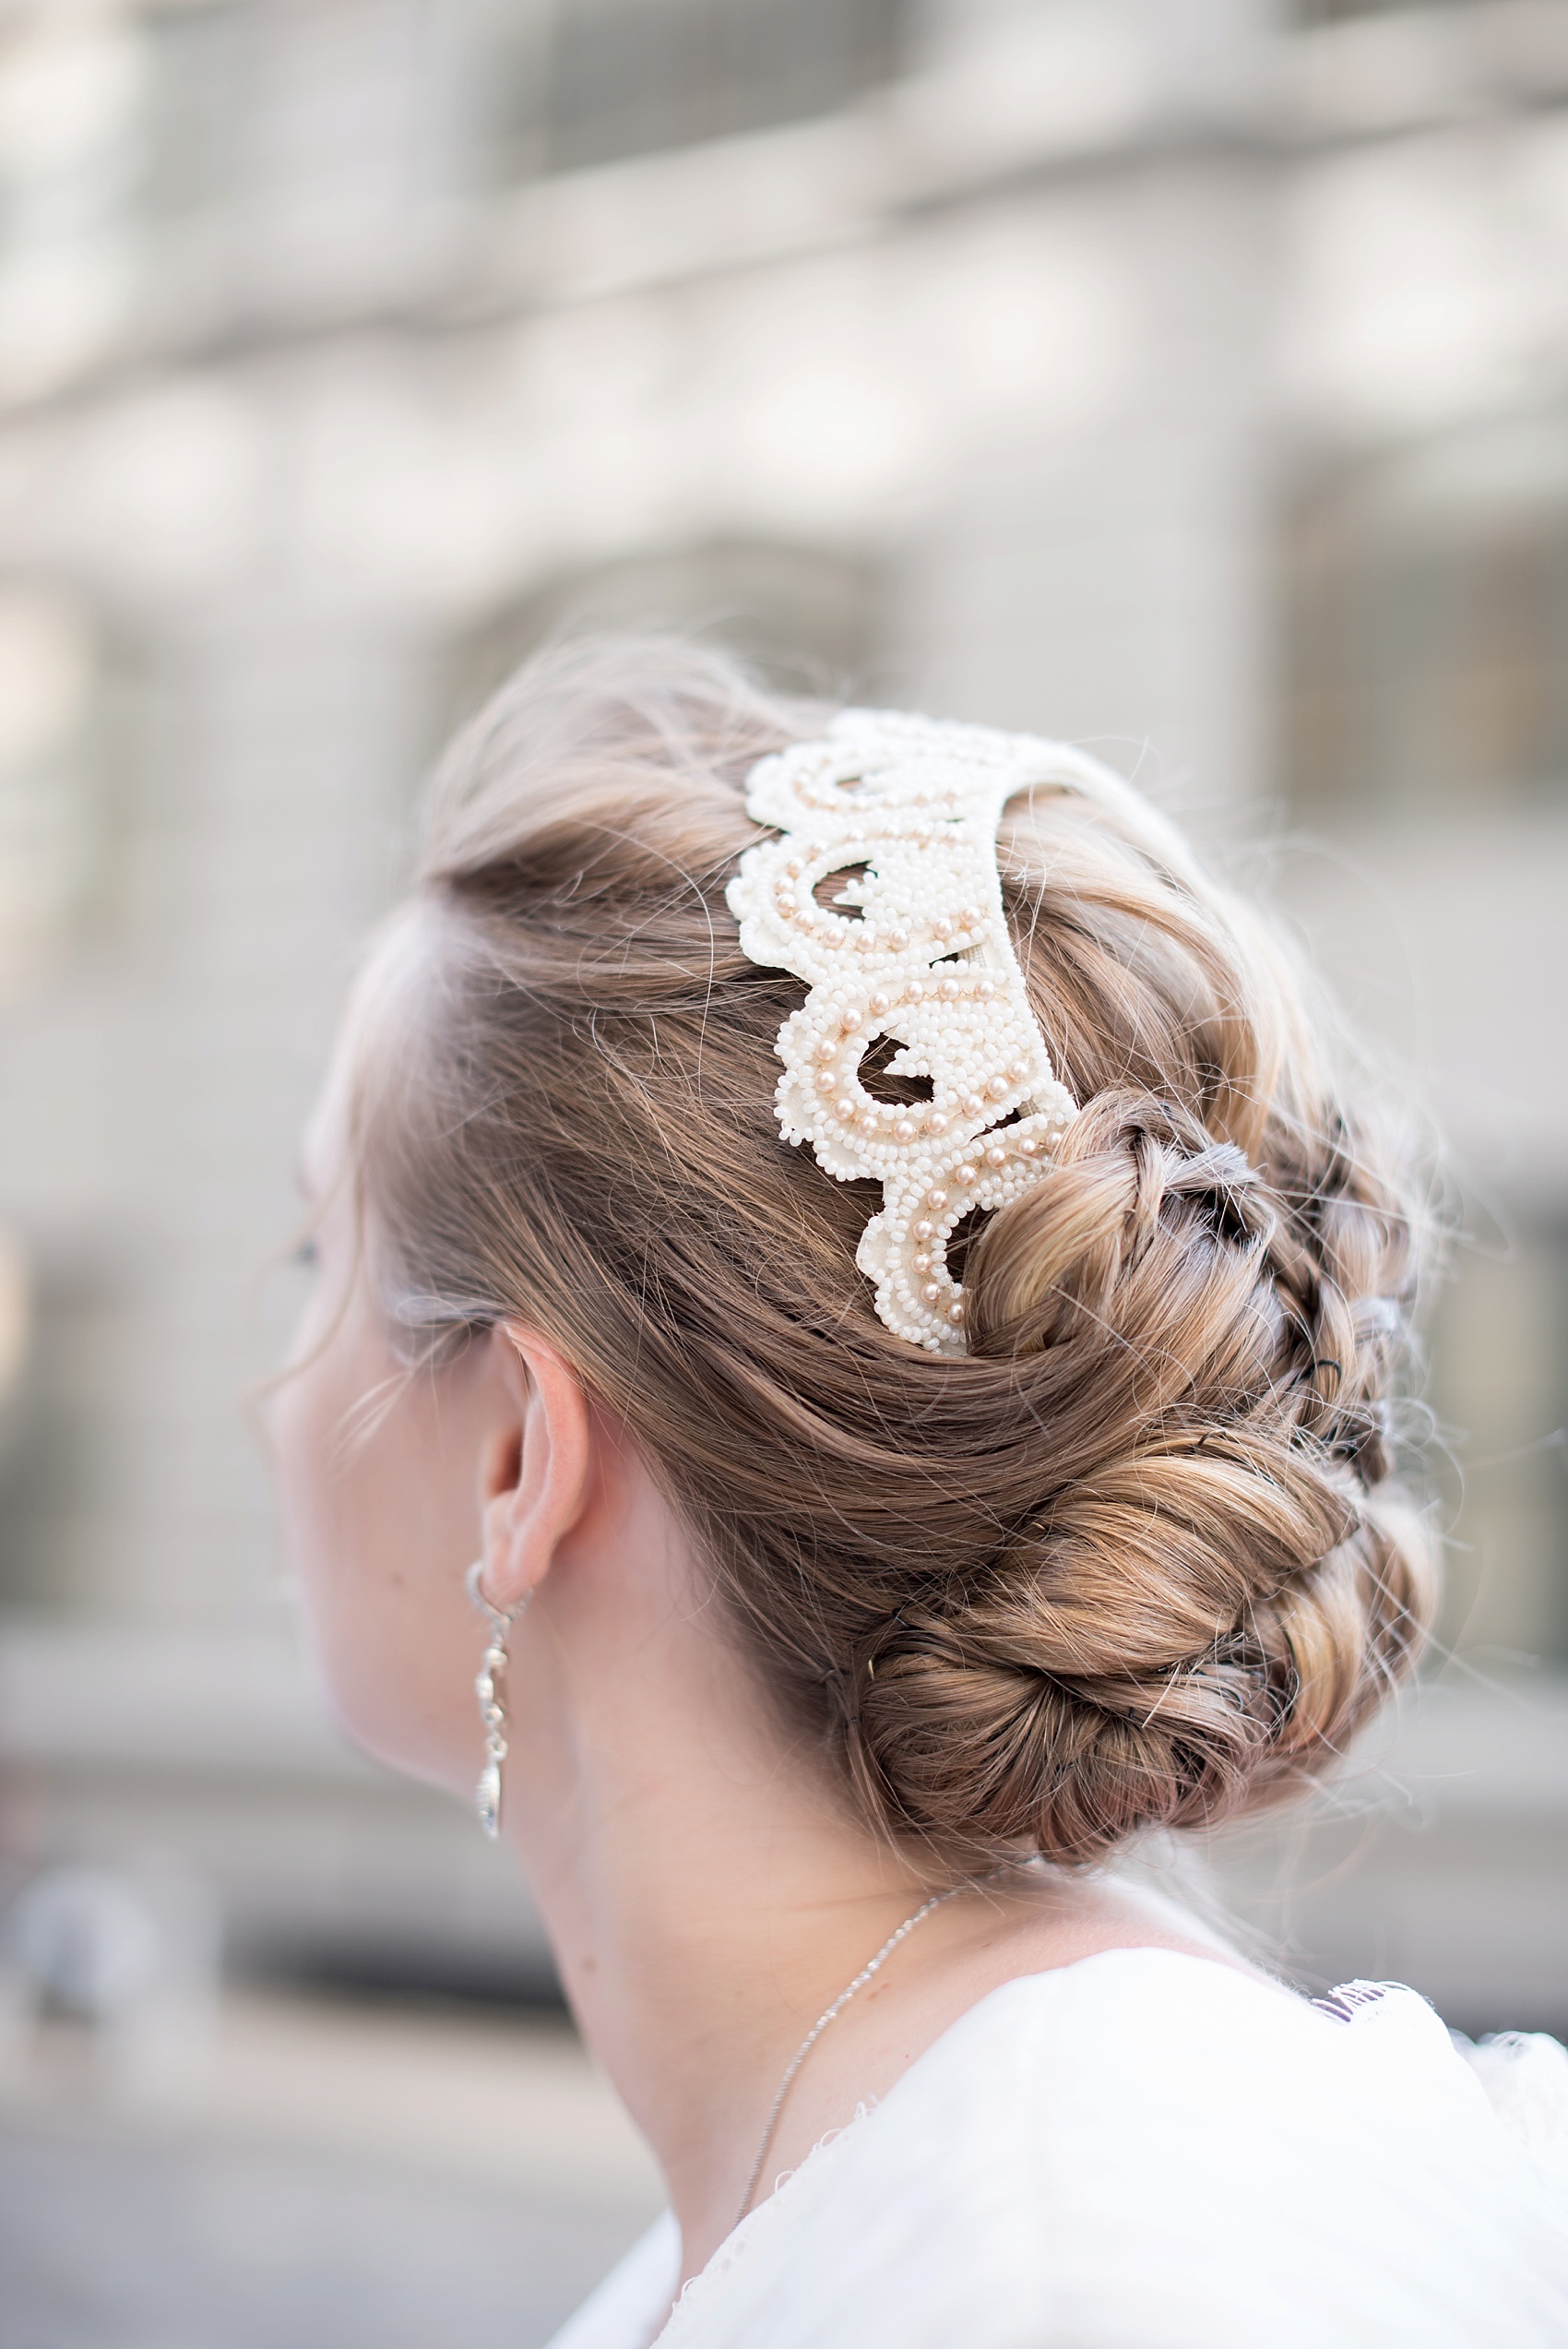 Wedding photos of the bride's up-do and heirloom beaded hair piece. Wedding at Brooklyn Bridge Park. Photos by Mikkel Paige Photography, NYC wedding photographer.